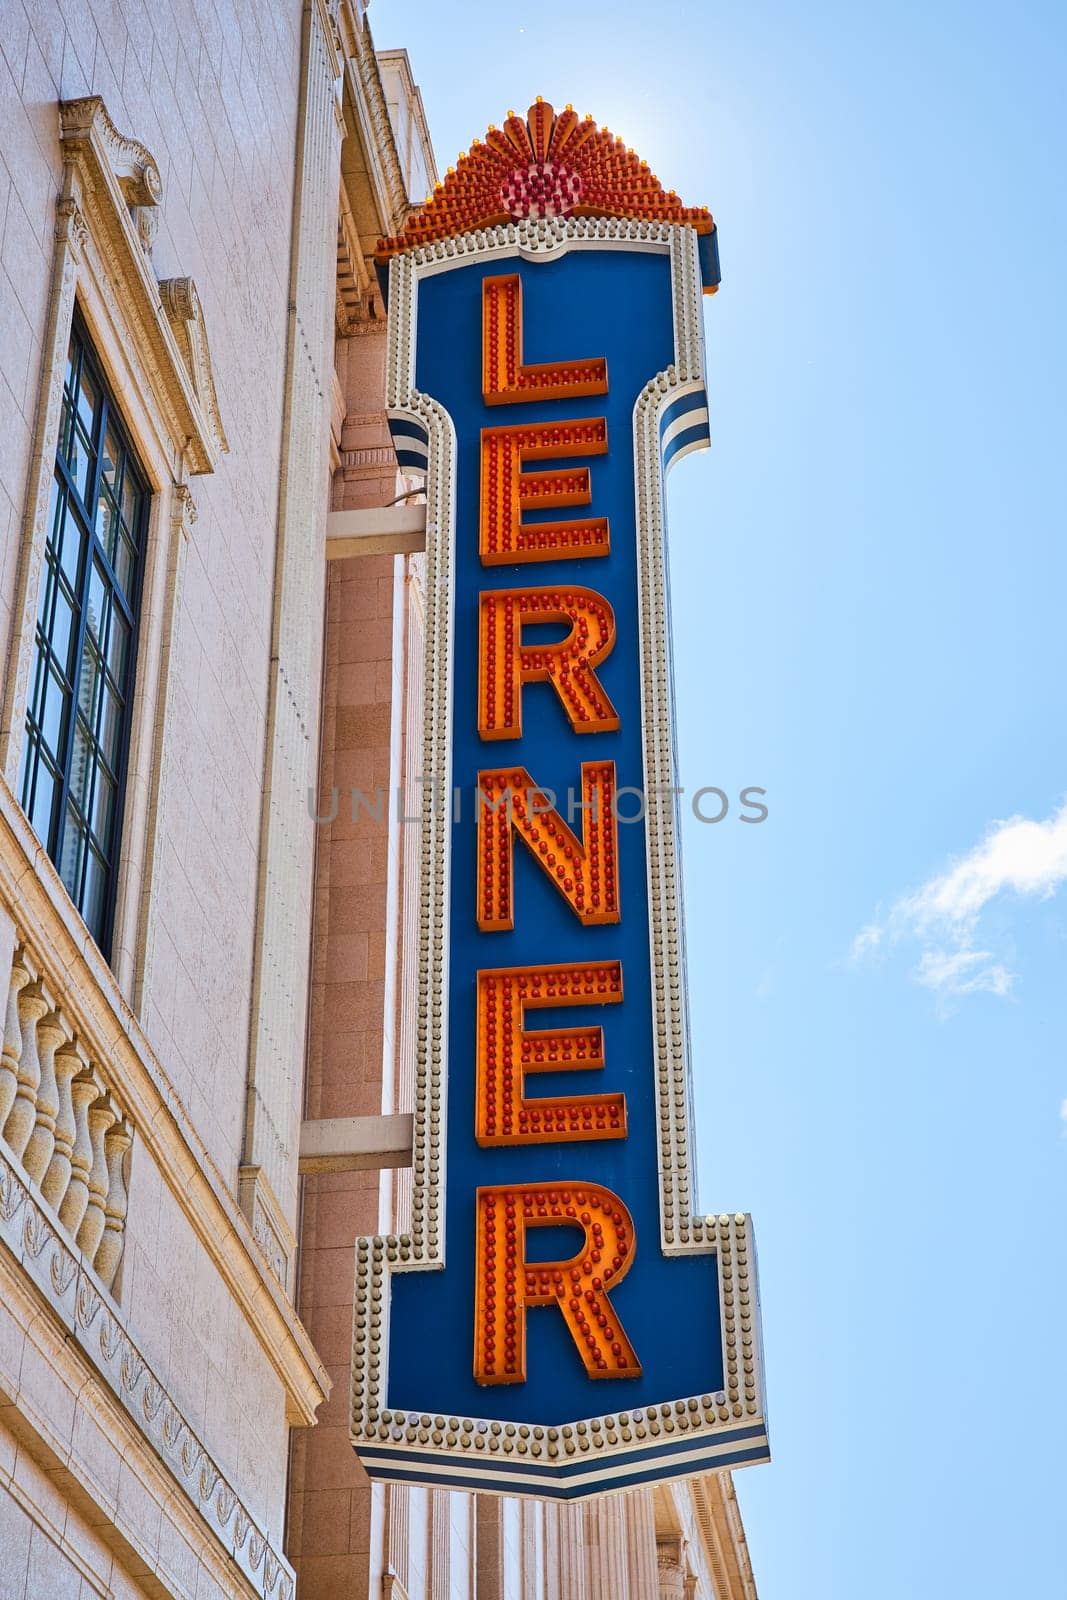 Vintage Lerner Theater Marquee Sign, Classic Cinema Detail, Urban Sky View by njproductions